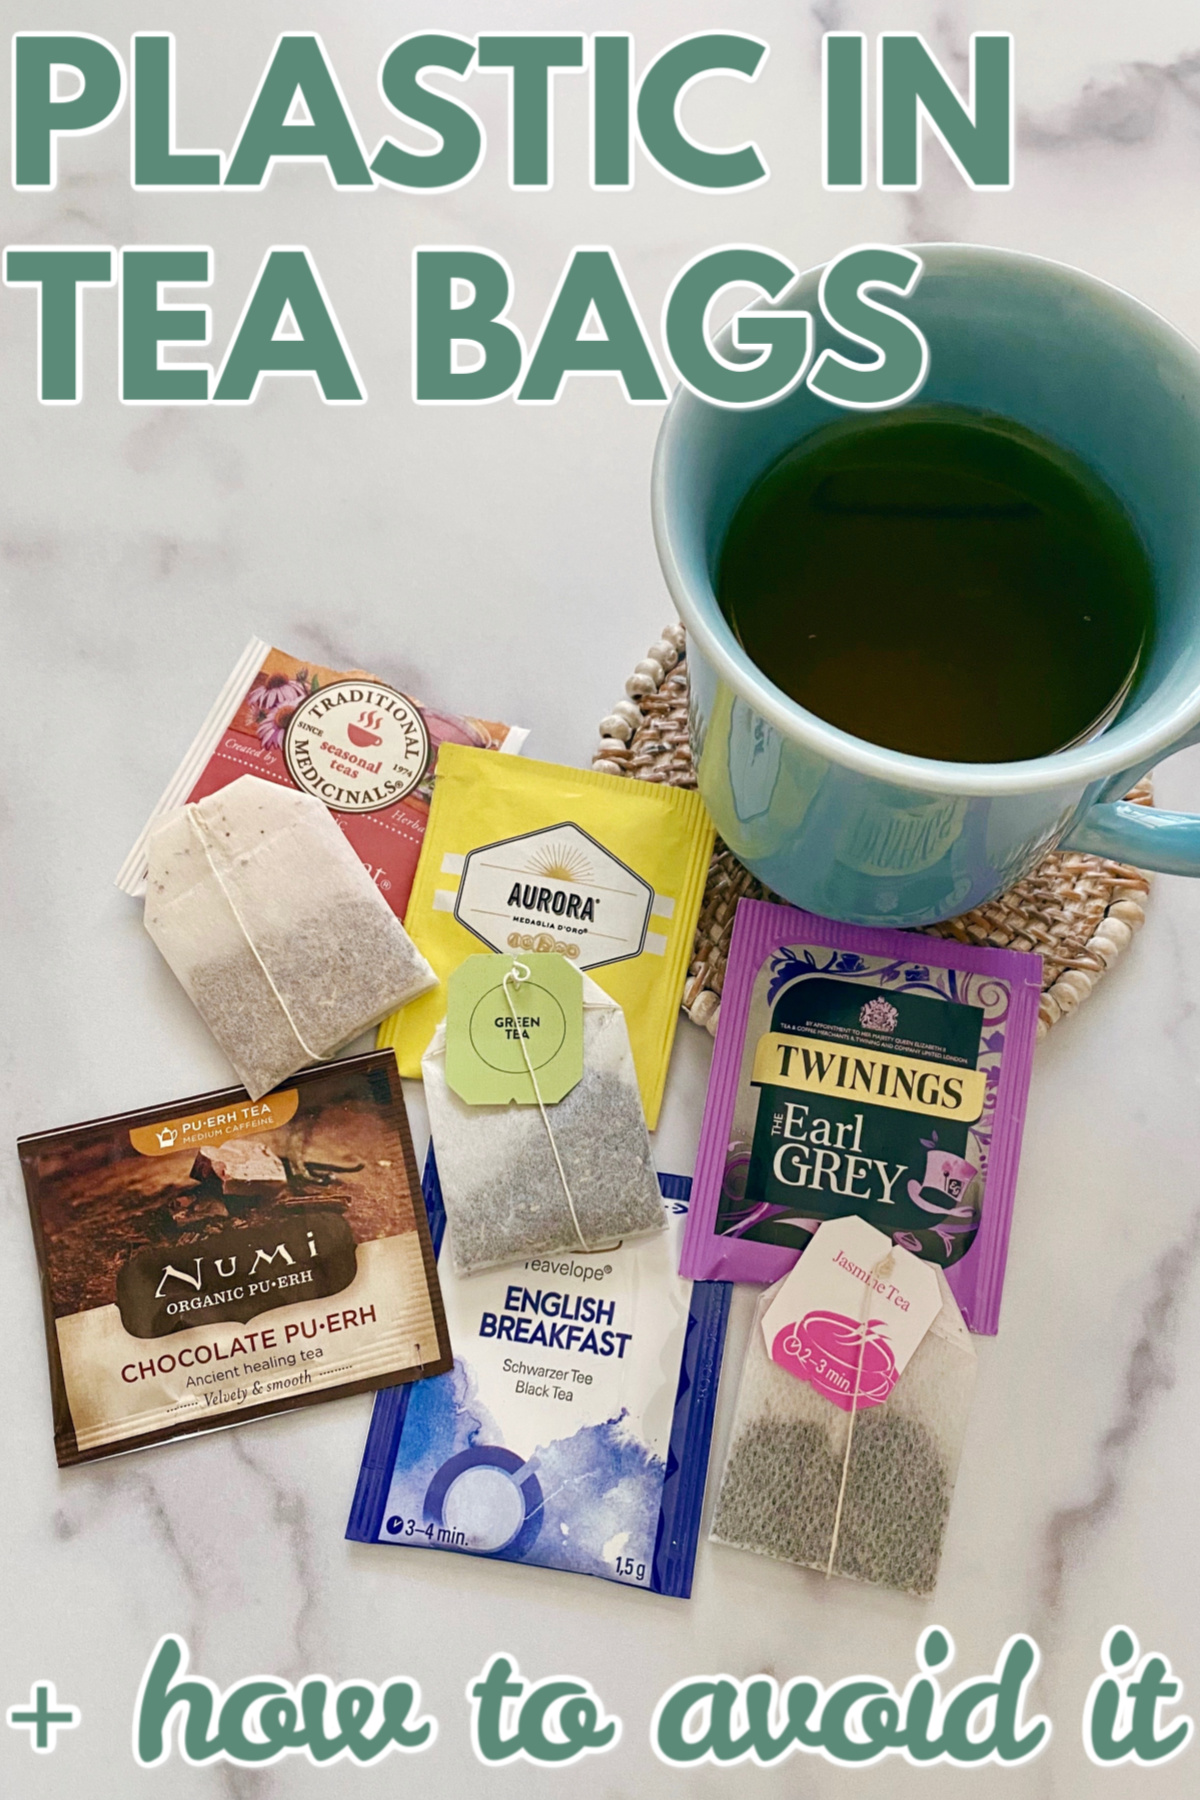 Plastic in Tea Bags (and all the brands that do & don't contain it)